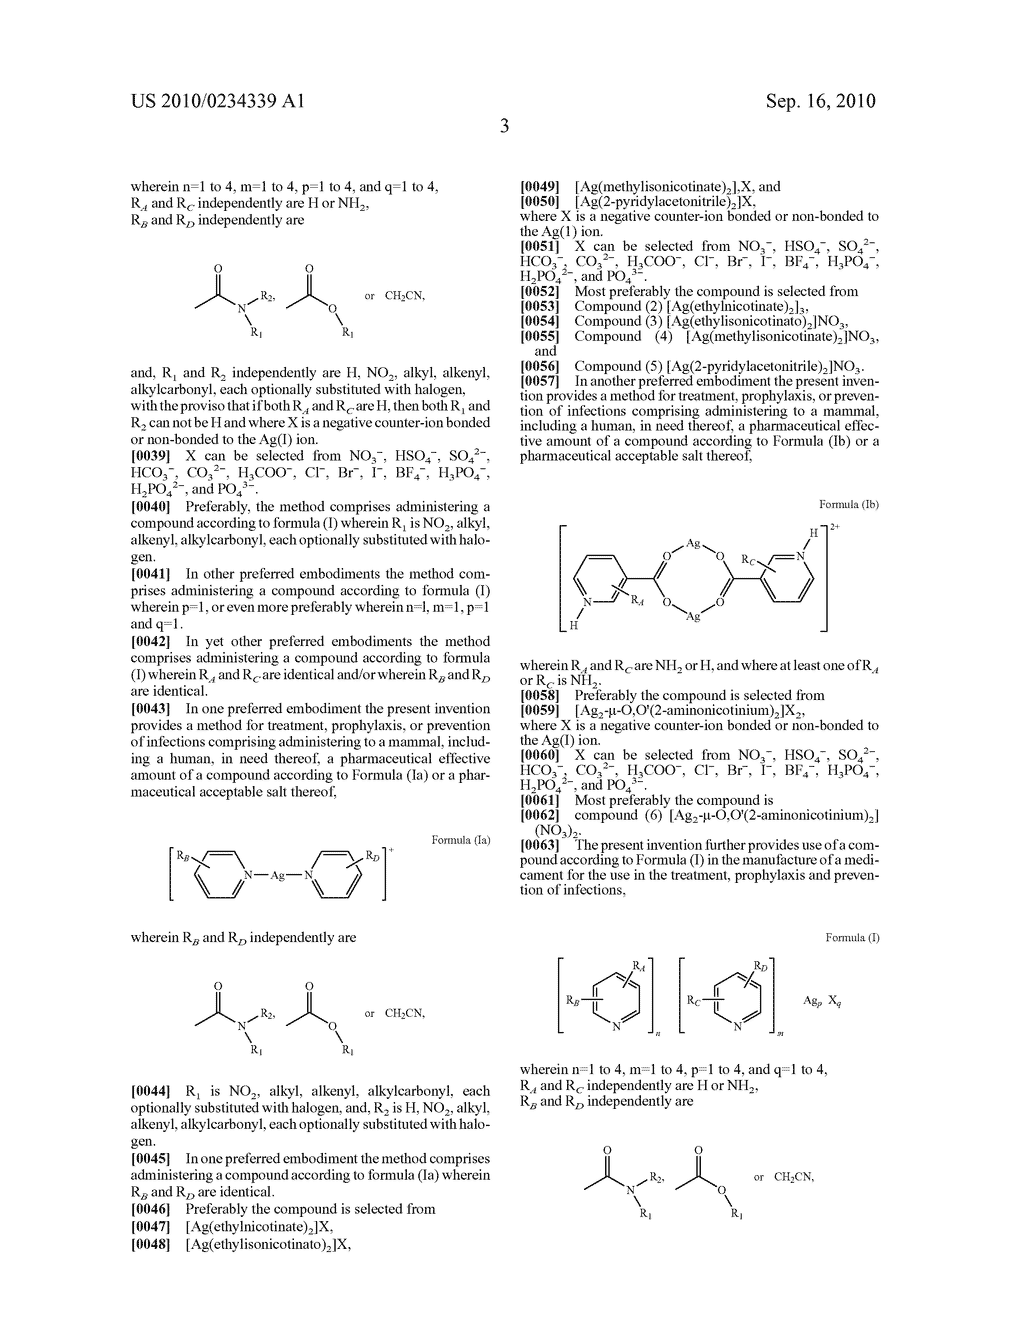 SILVER(I) COMPOUNDS AND THEIR USE IN PHARMACEUTICAL COMPOSITIONS FOR THE TREATMENT,PROPHYLAXIS AND PREVENTION OF INFECTIONS - diagram, schematic, and image 04